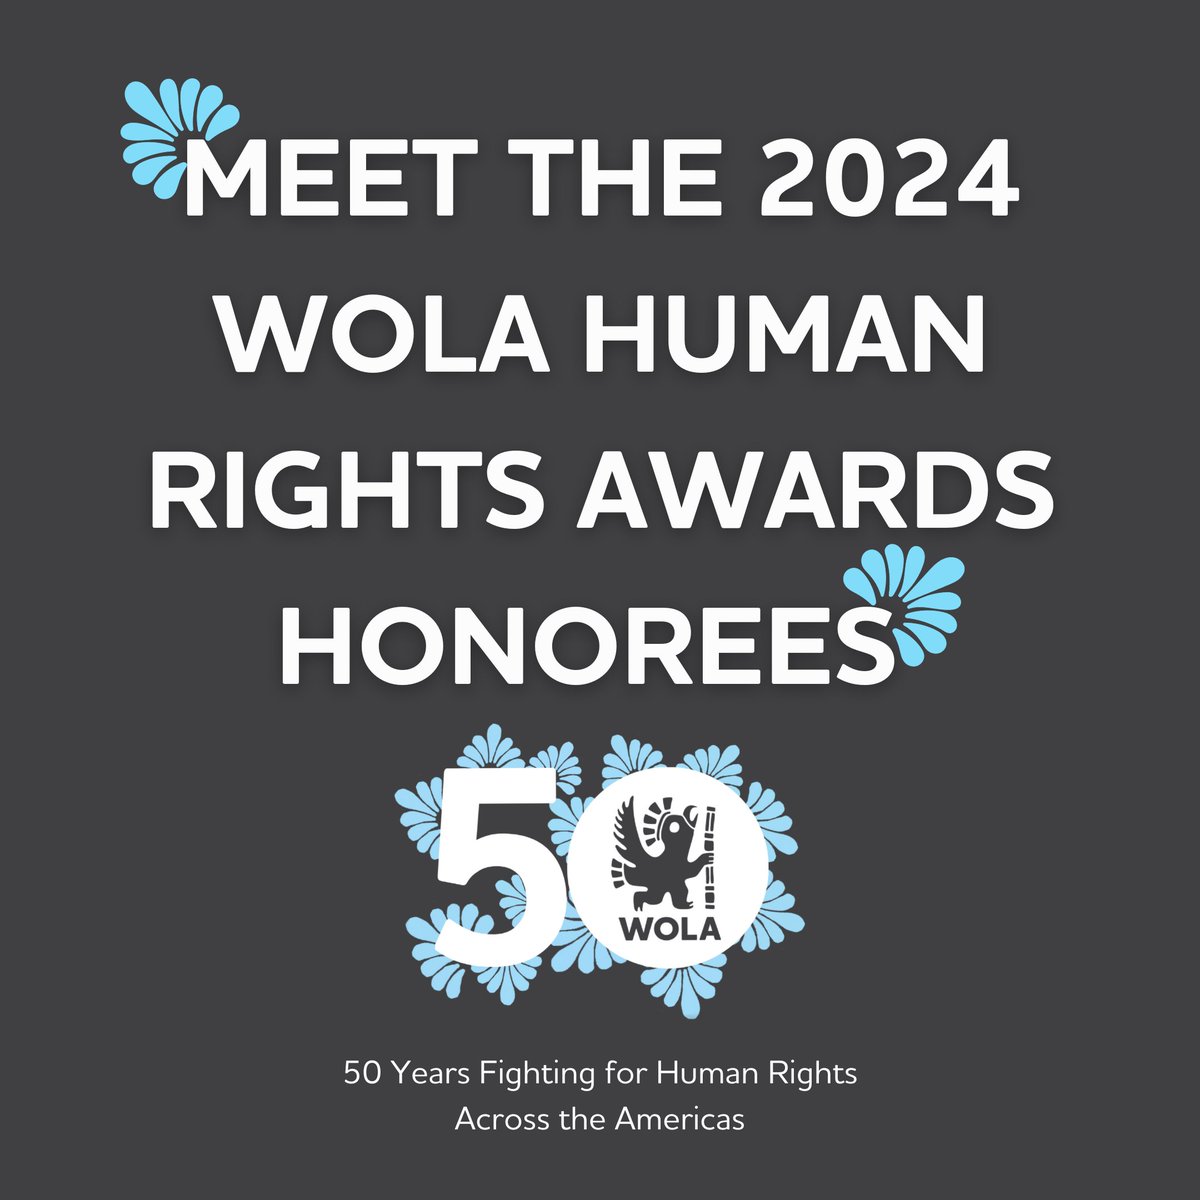 🎉 Exciting News 🏆 @WOLA_org is proud to announce the distinguished honorees for its 2024 WOLA Human Rights Awards on May 9, 2024 in Washington D.C. as we commemorate 5 decades of advocacy for human rights in the Americas #WOLA50 Read the announcement: wola.org/2024/02/wola-h…